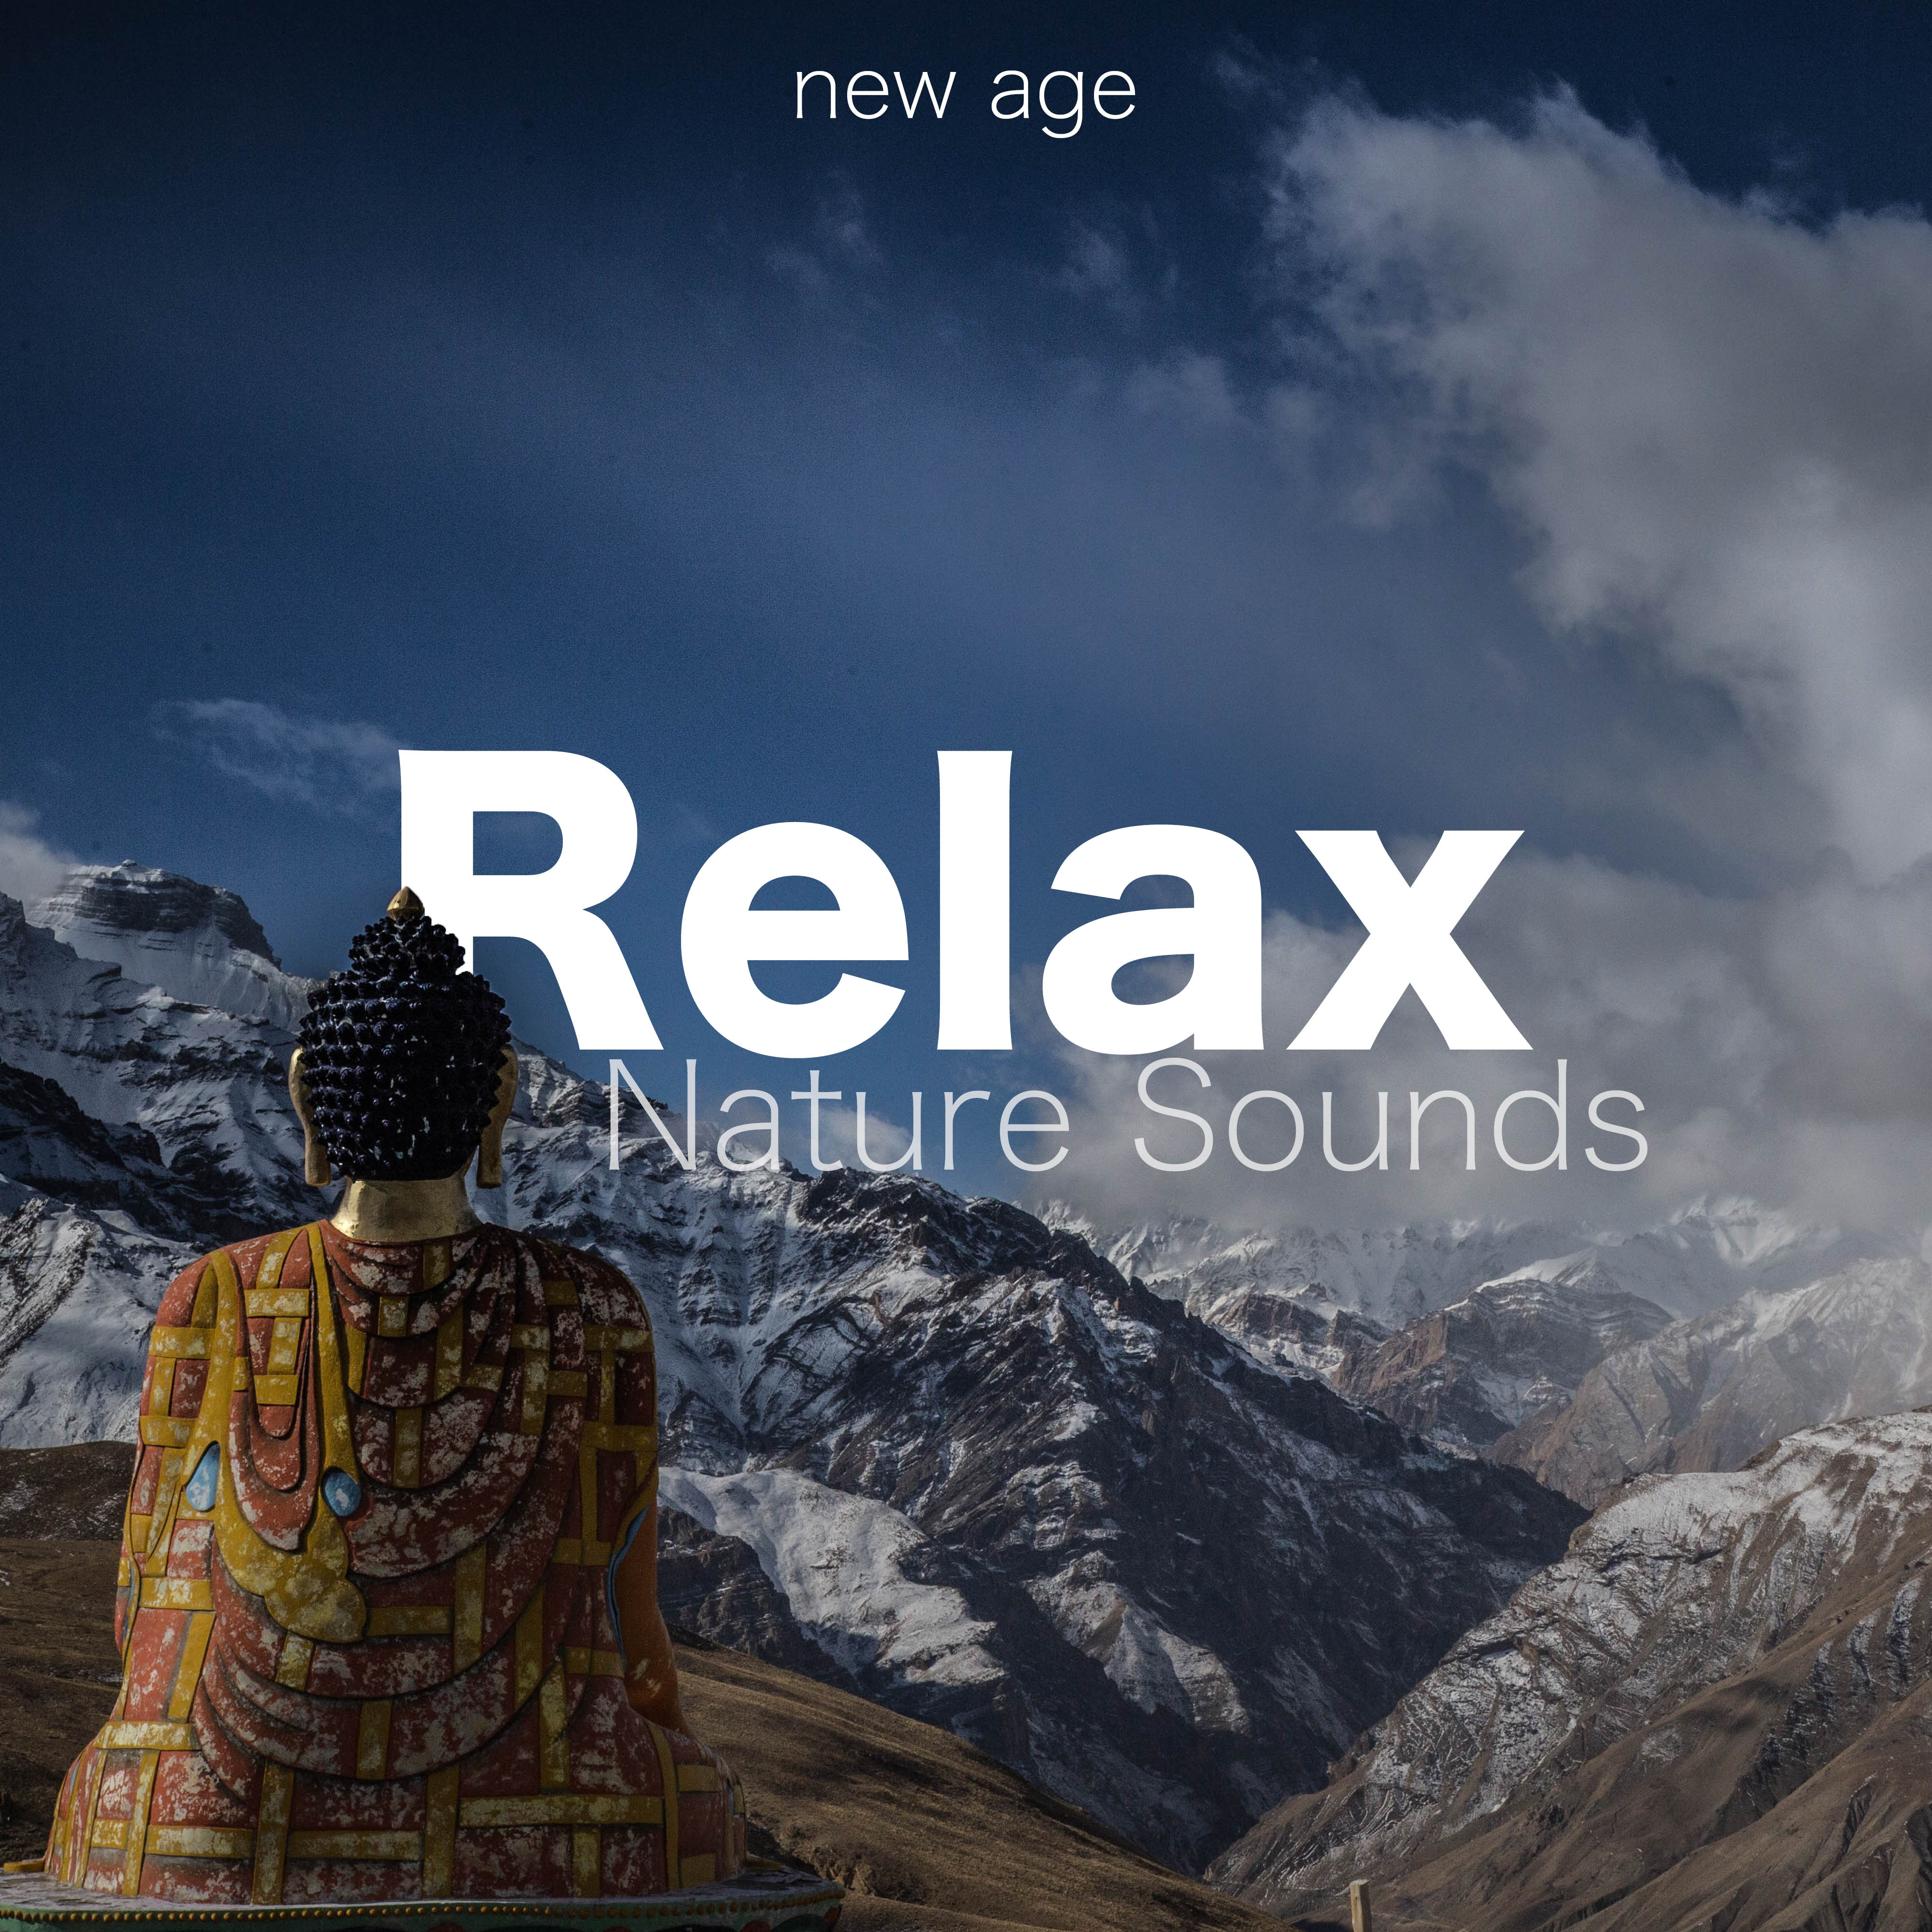 Relax - Nature Sounds, Piano Music for Sleep and Relaxation